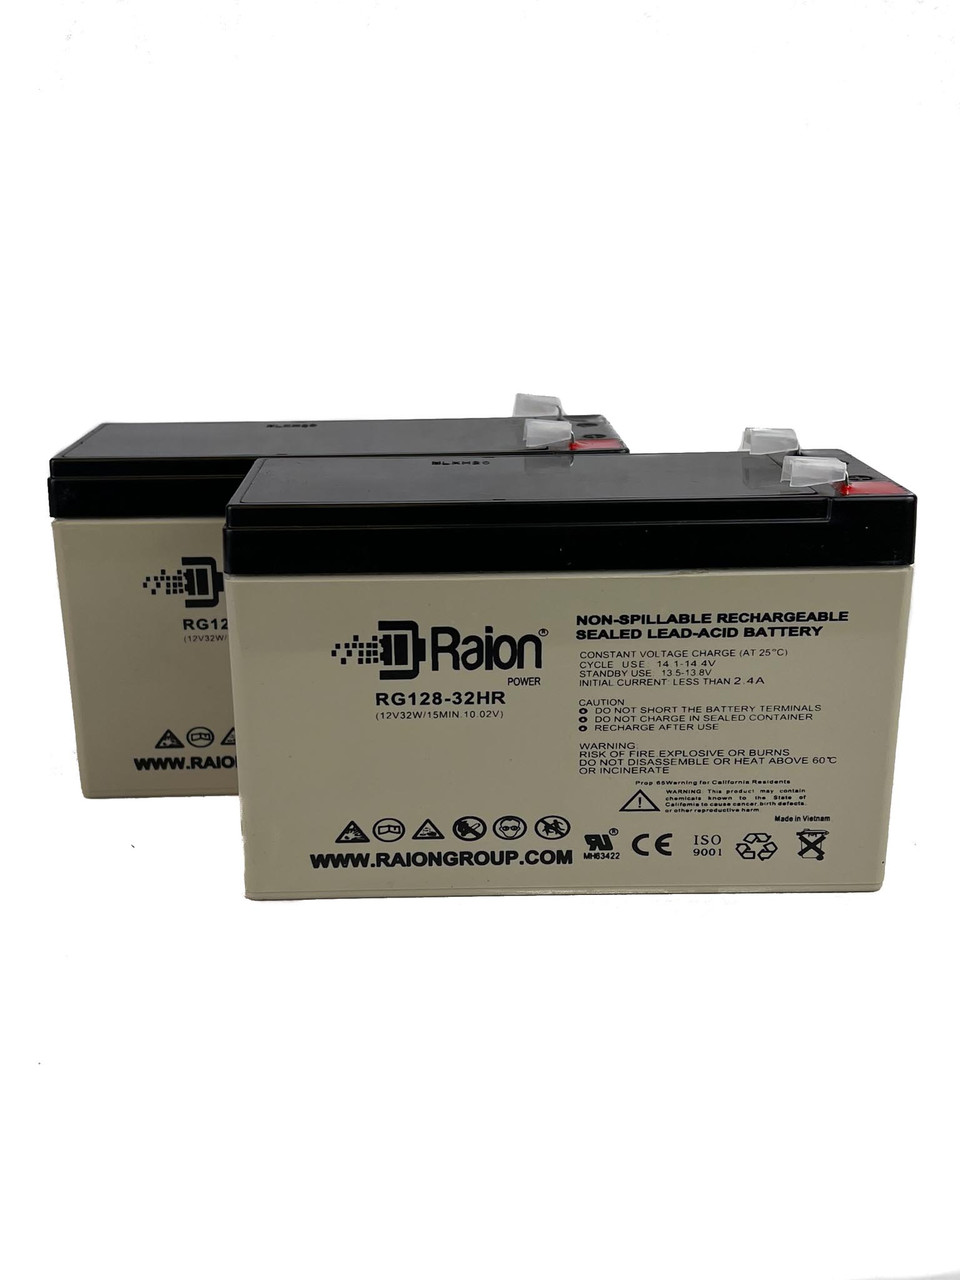 Raion Power 12V 7.5Ah High Rate Discharge UPS Batteries for Alpha Technologies ALI Plus 700T Wall Mount (017-737-108) - 2 Pack